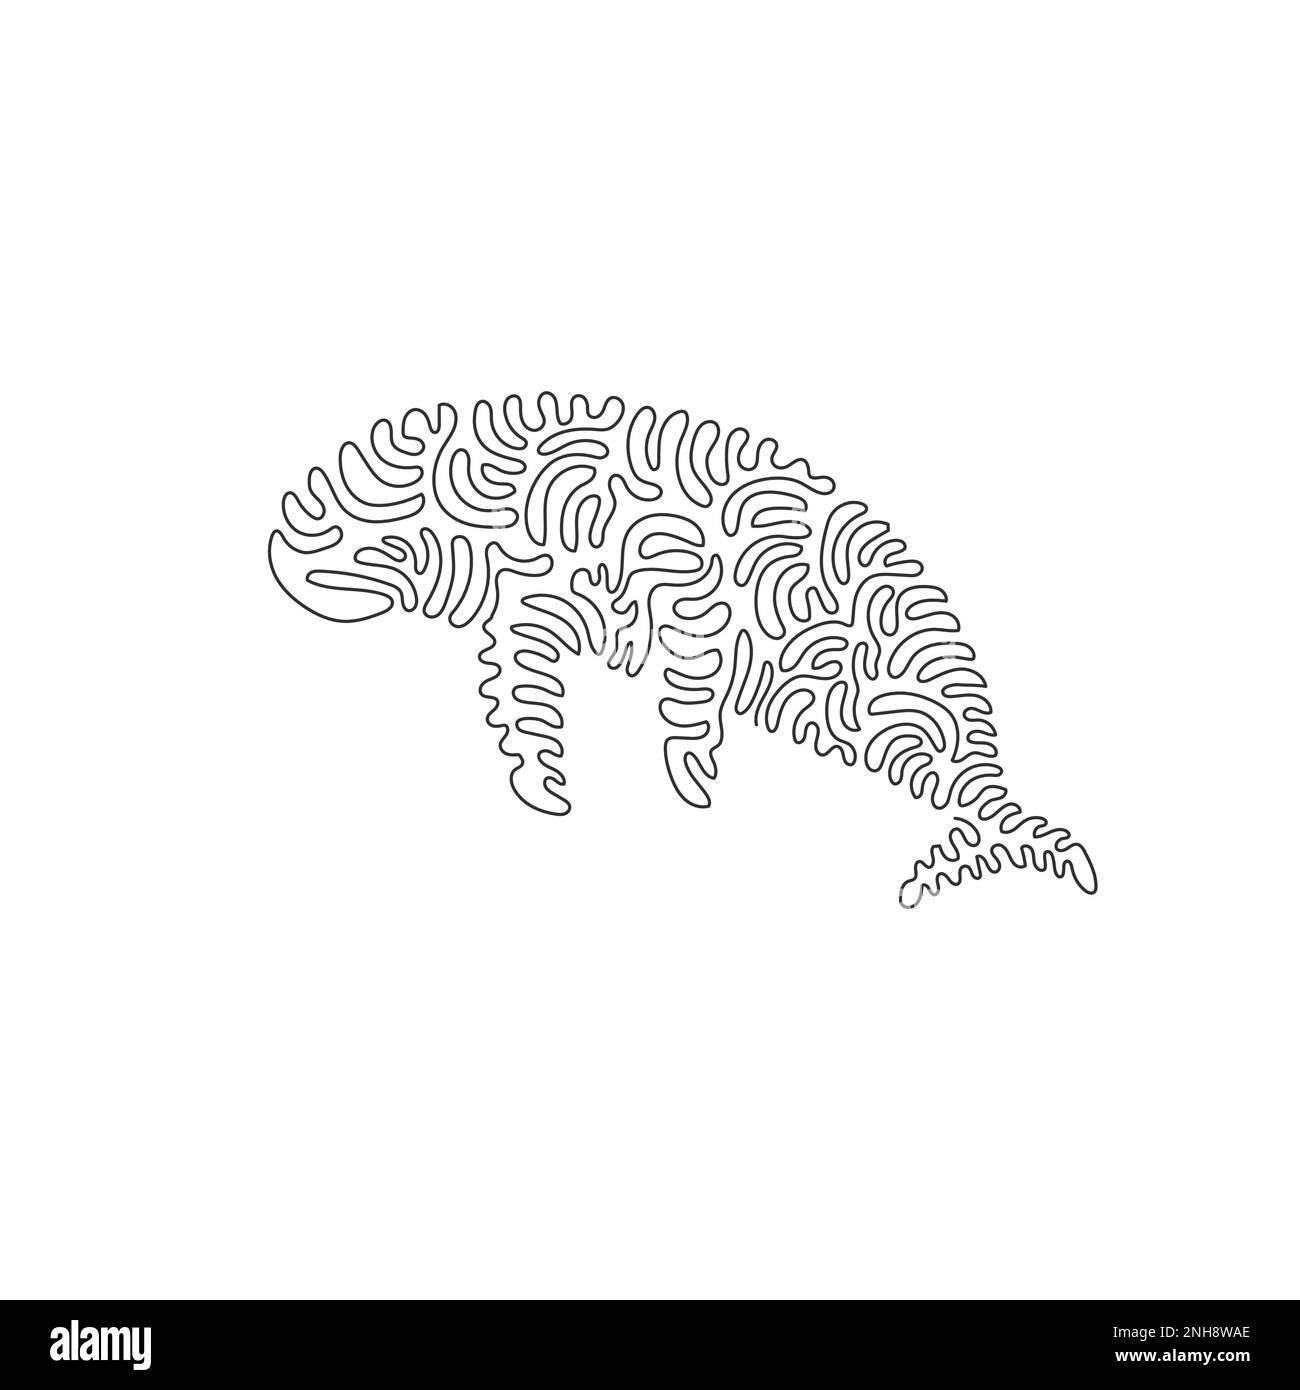 Continuous curve one line drawing of adorable dugong abstract art. Single line editable stroke vector illustration of dugong has no dorsal fin Stock Vector